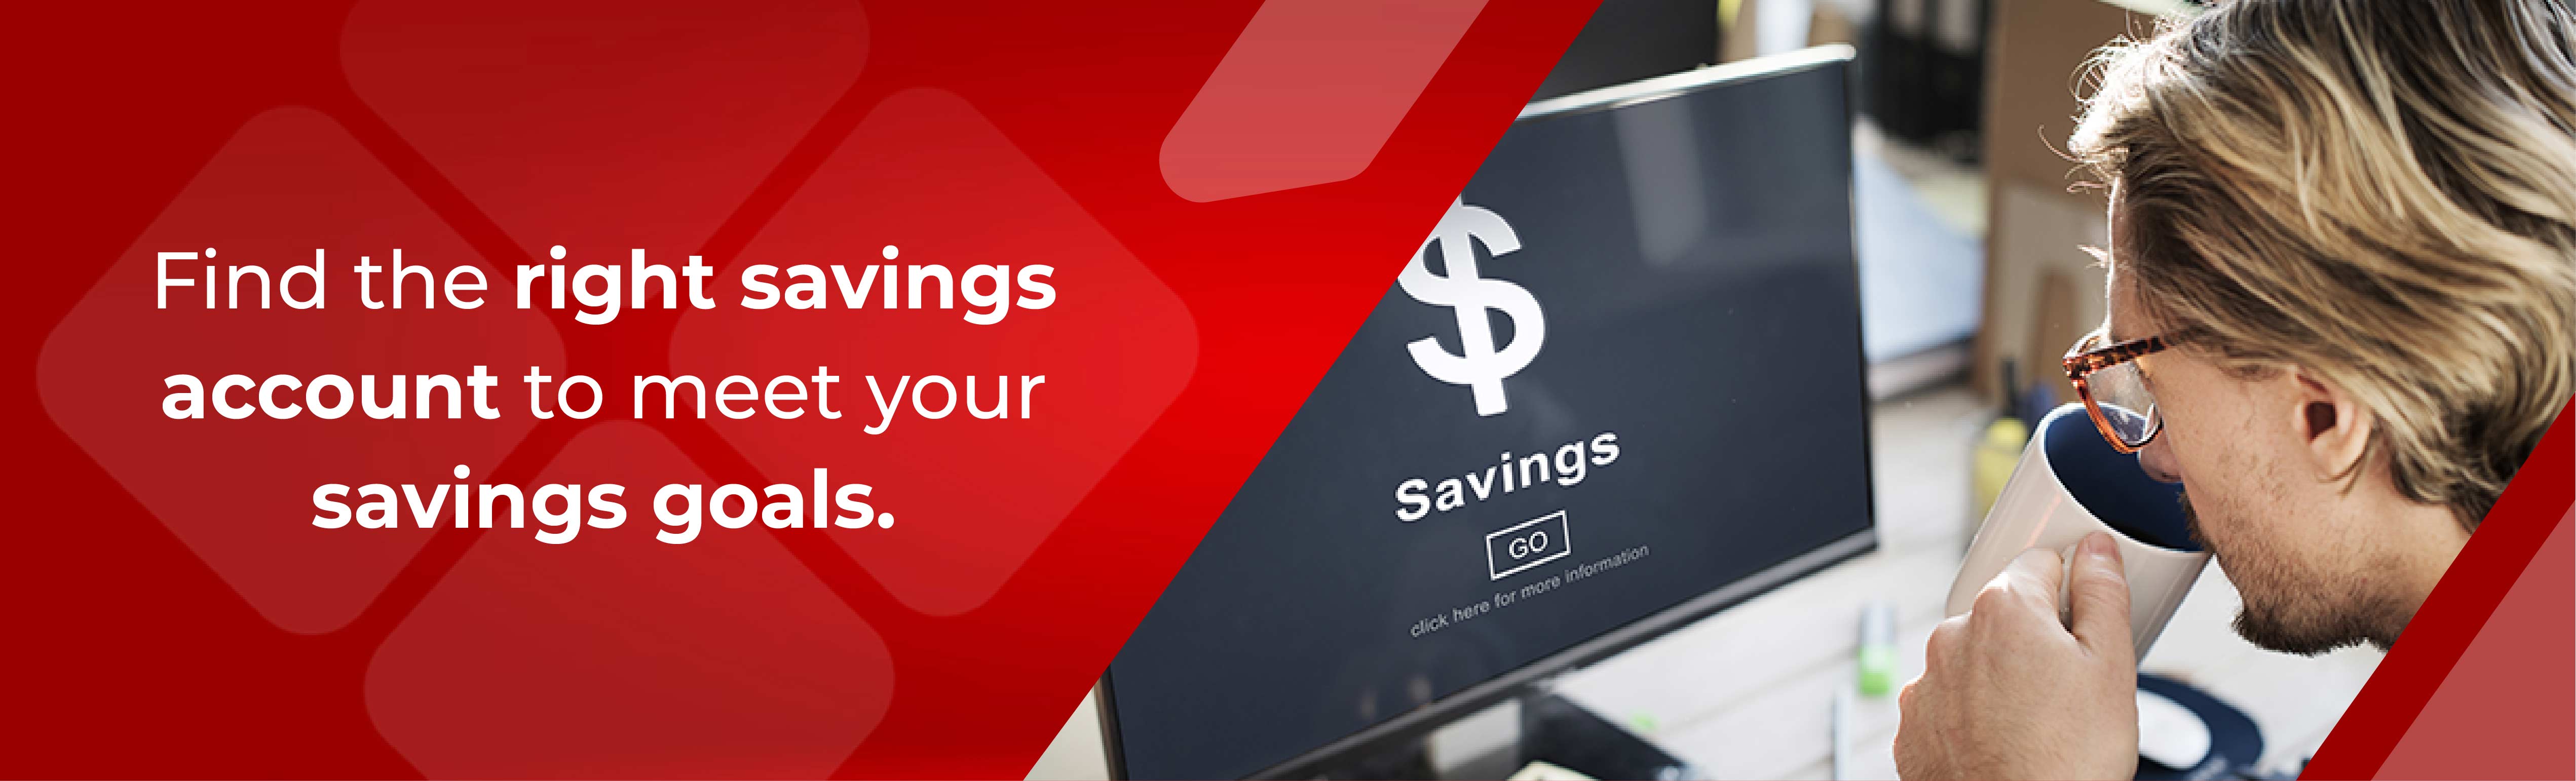 Find the right savings account to meet your savings goals